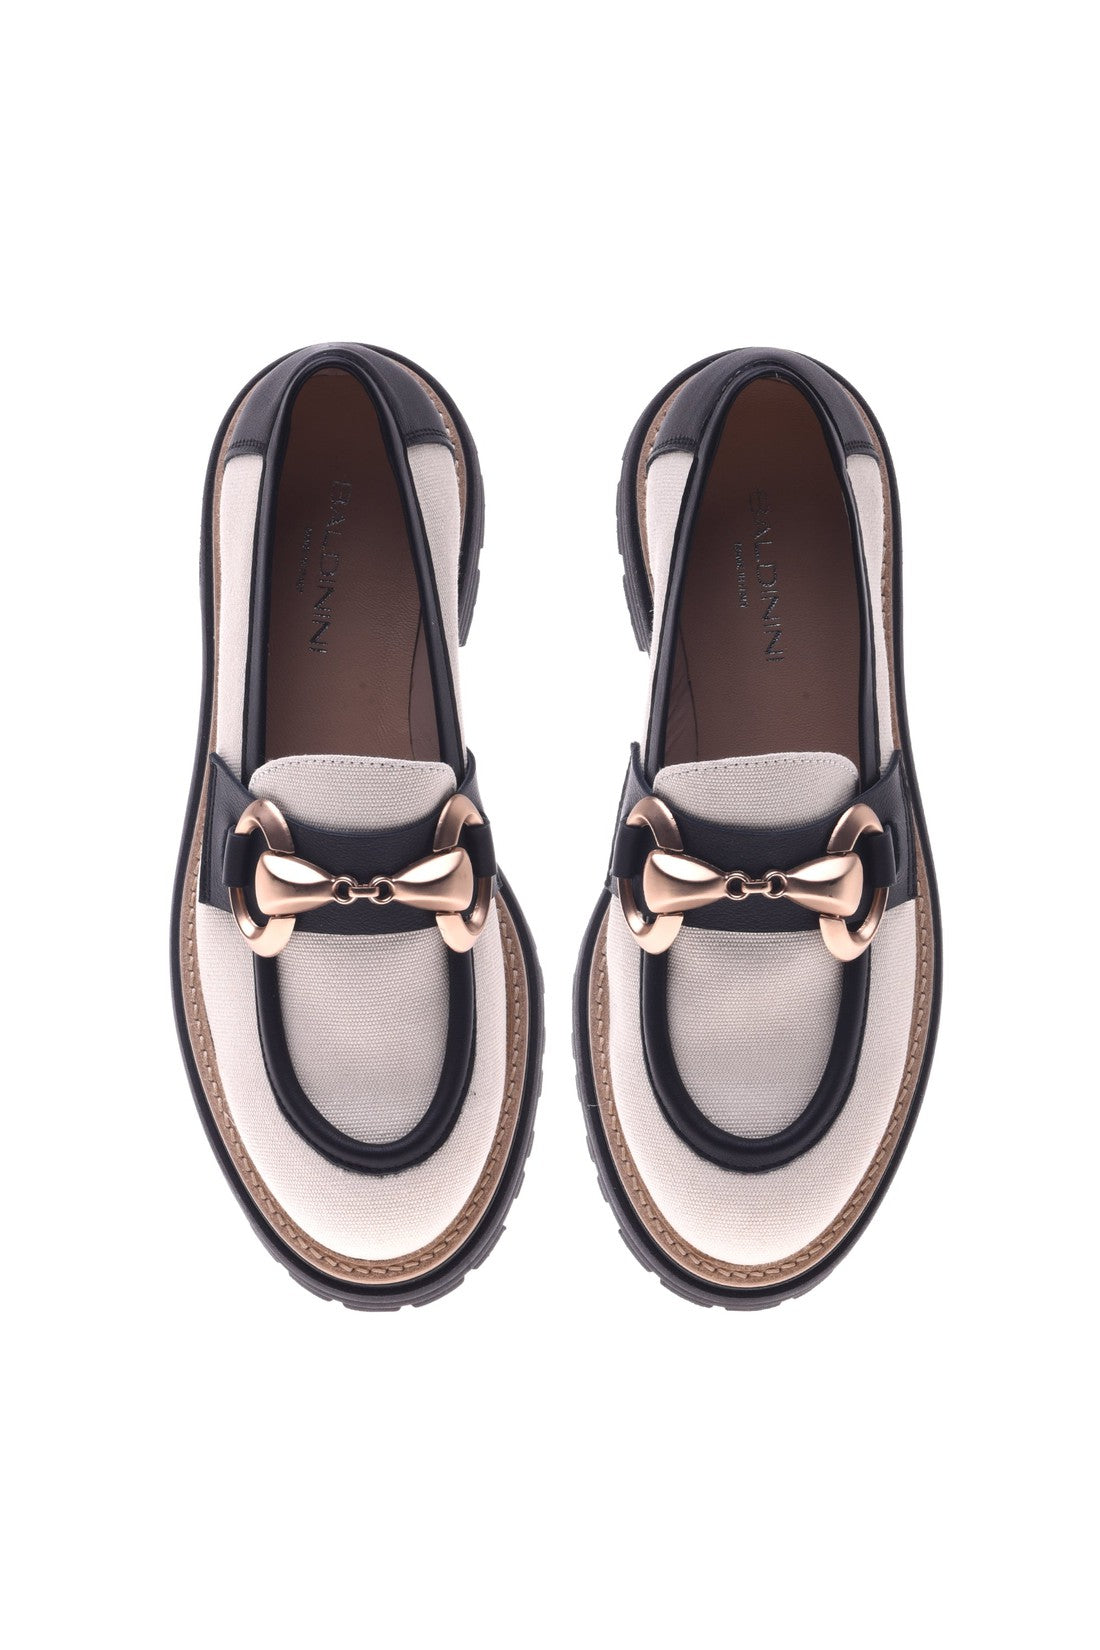 Loafer in black and beige shiny calfskin